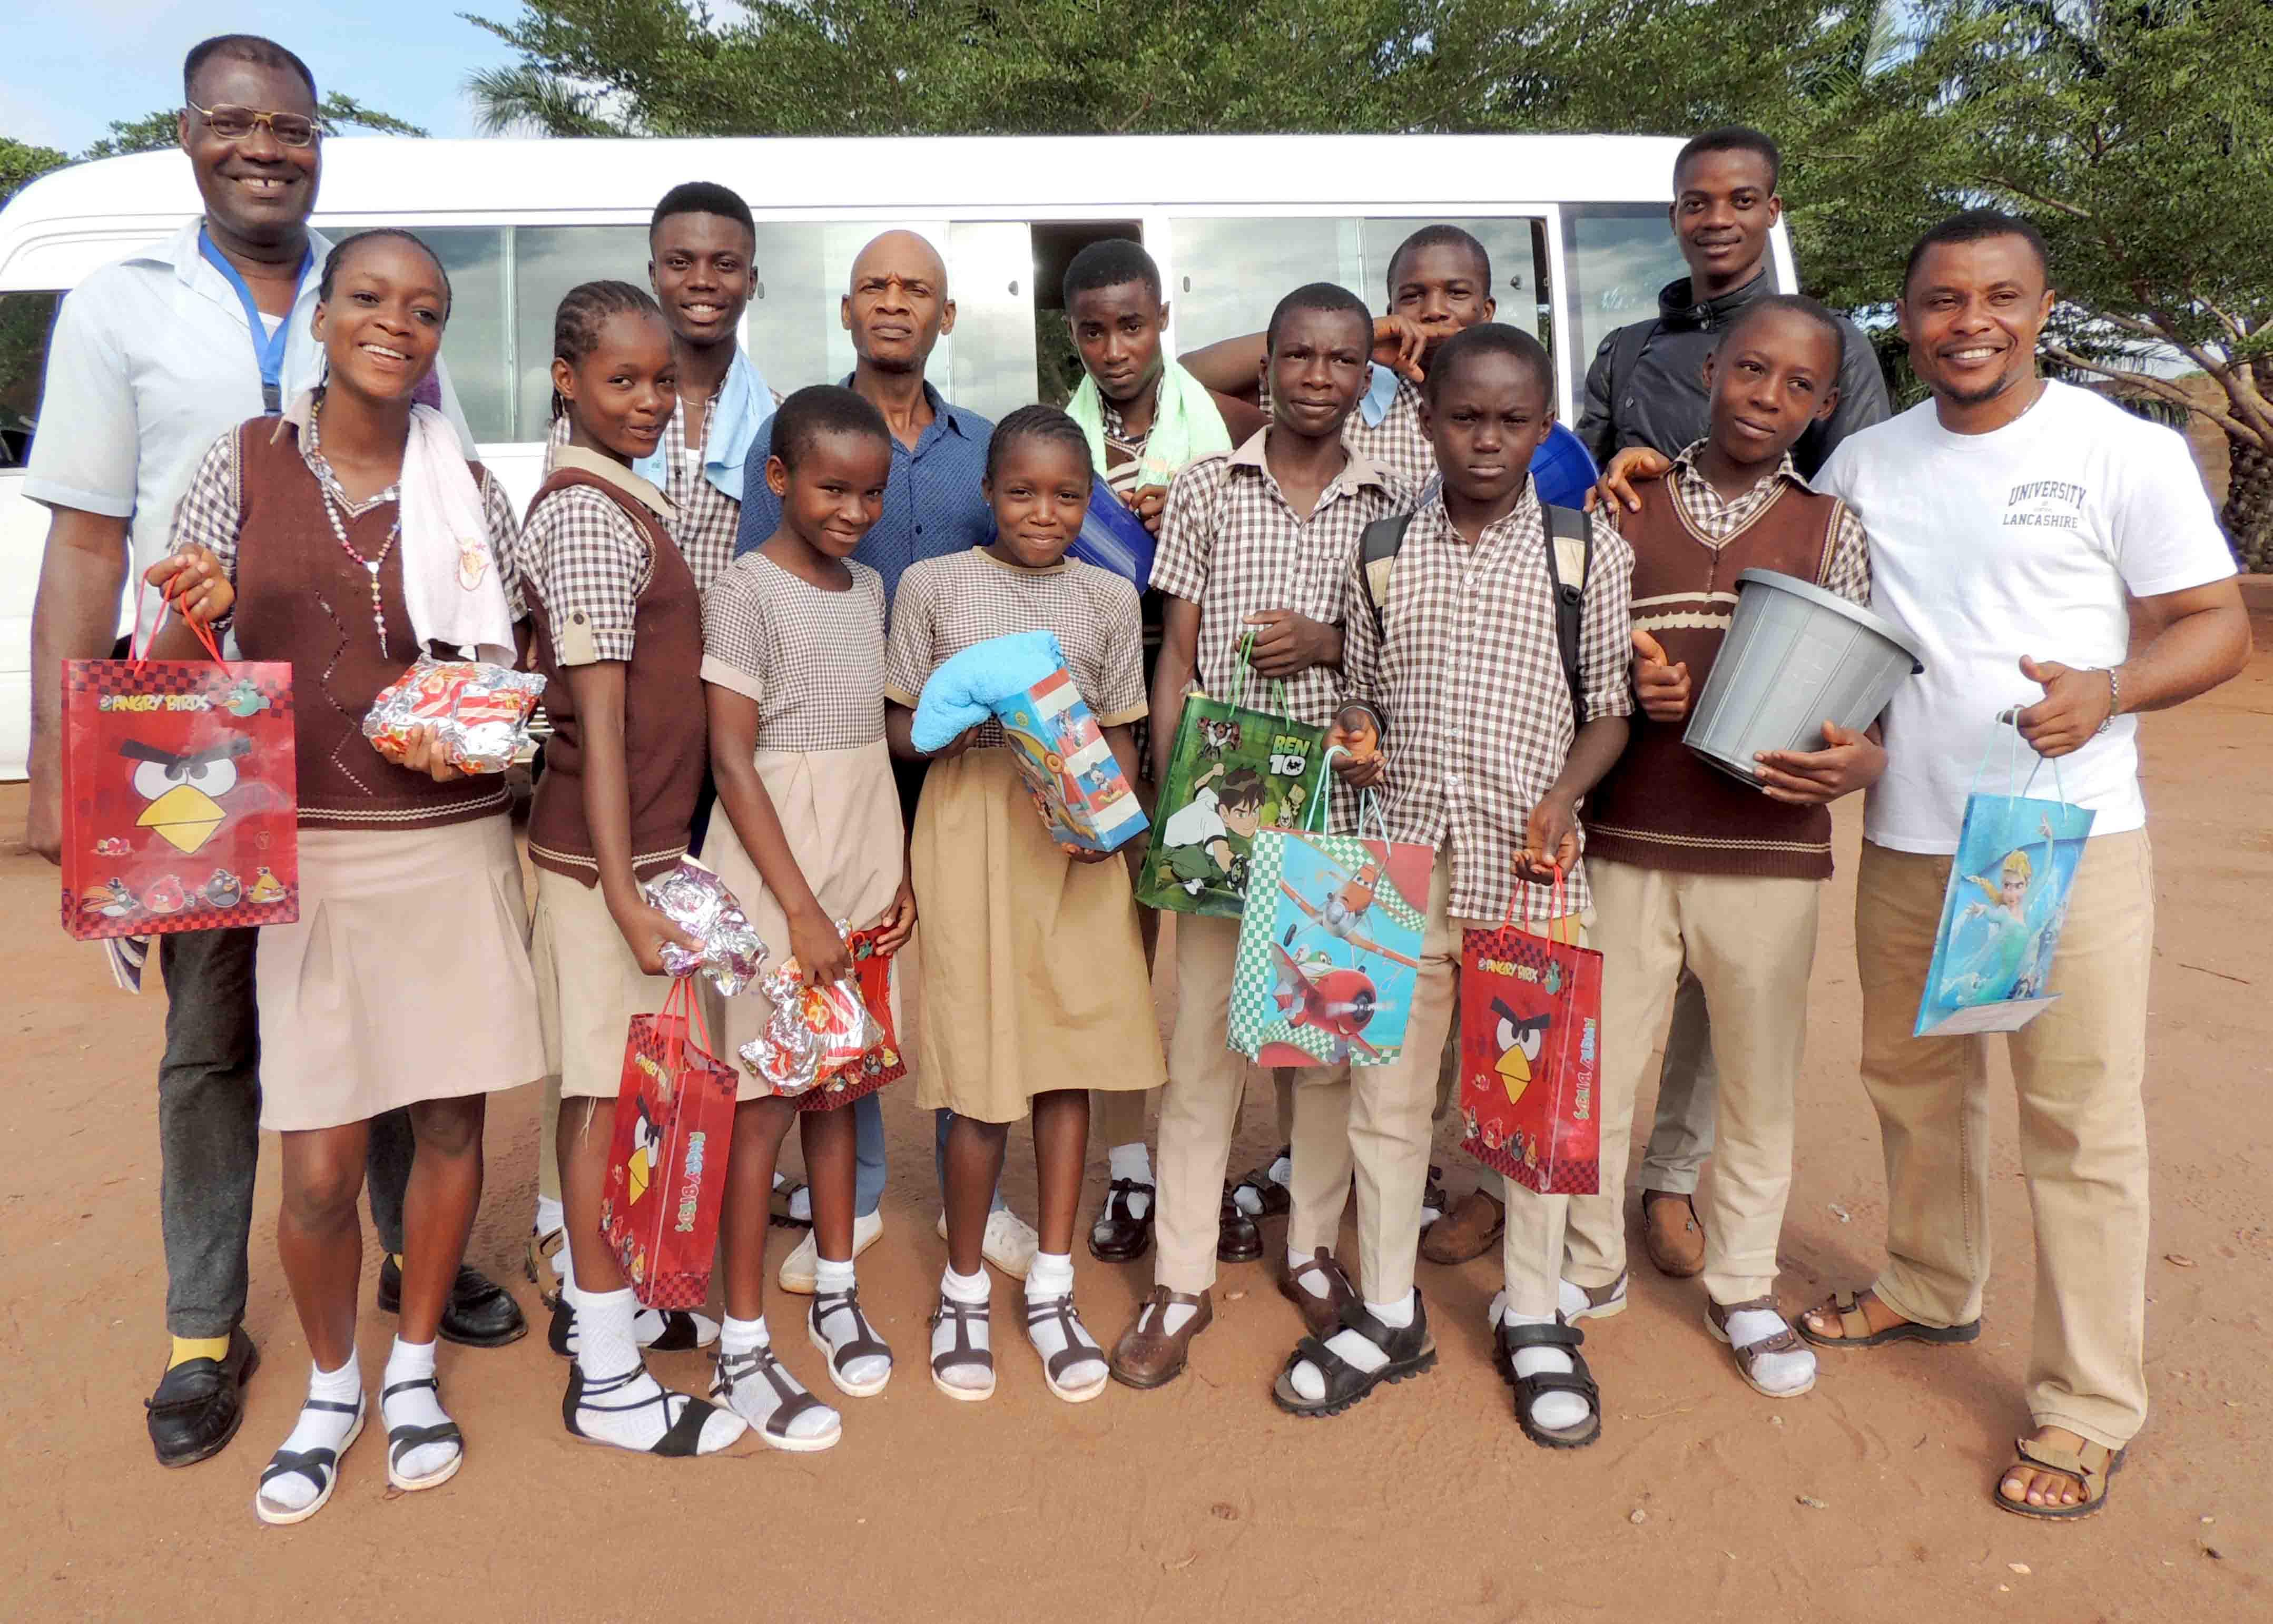 Tremendous sporting successes at the Holy Trinity School in Uromi